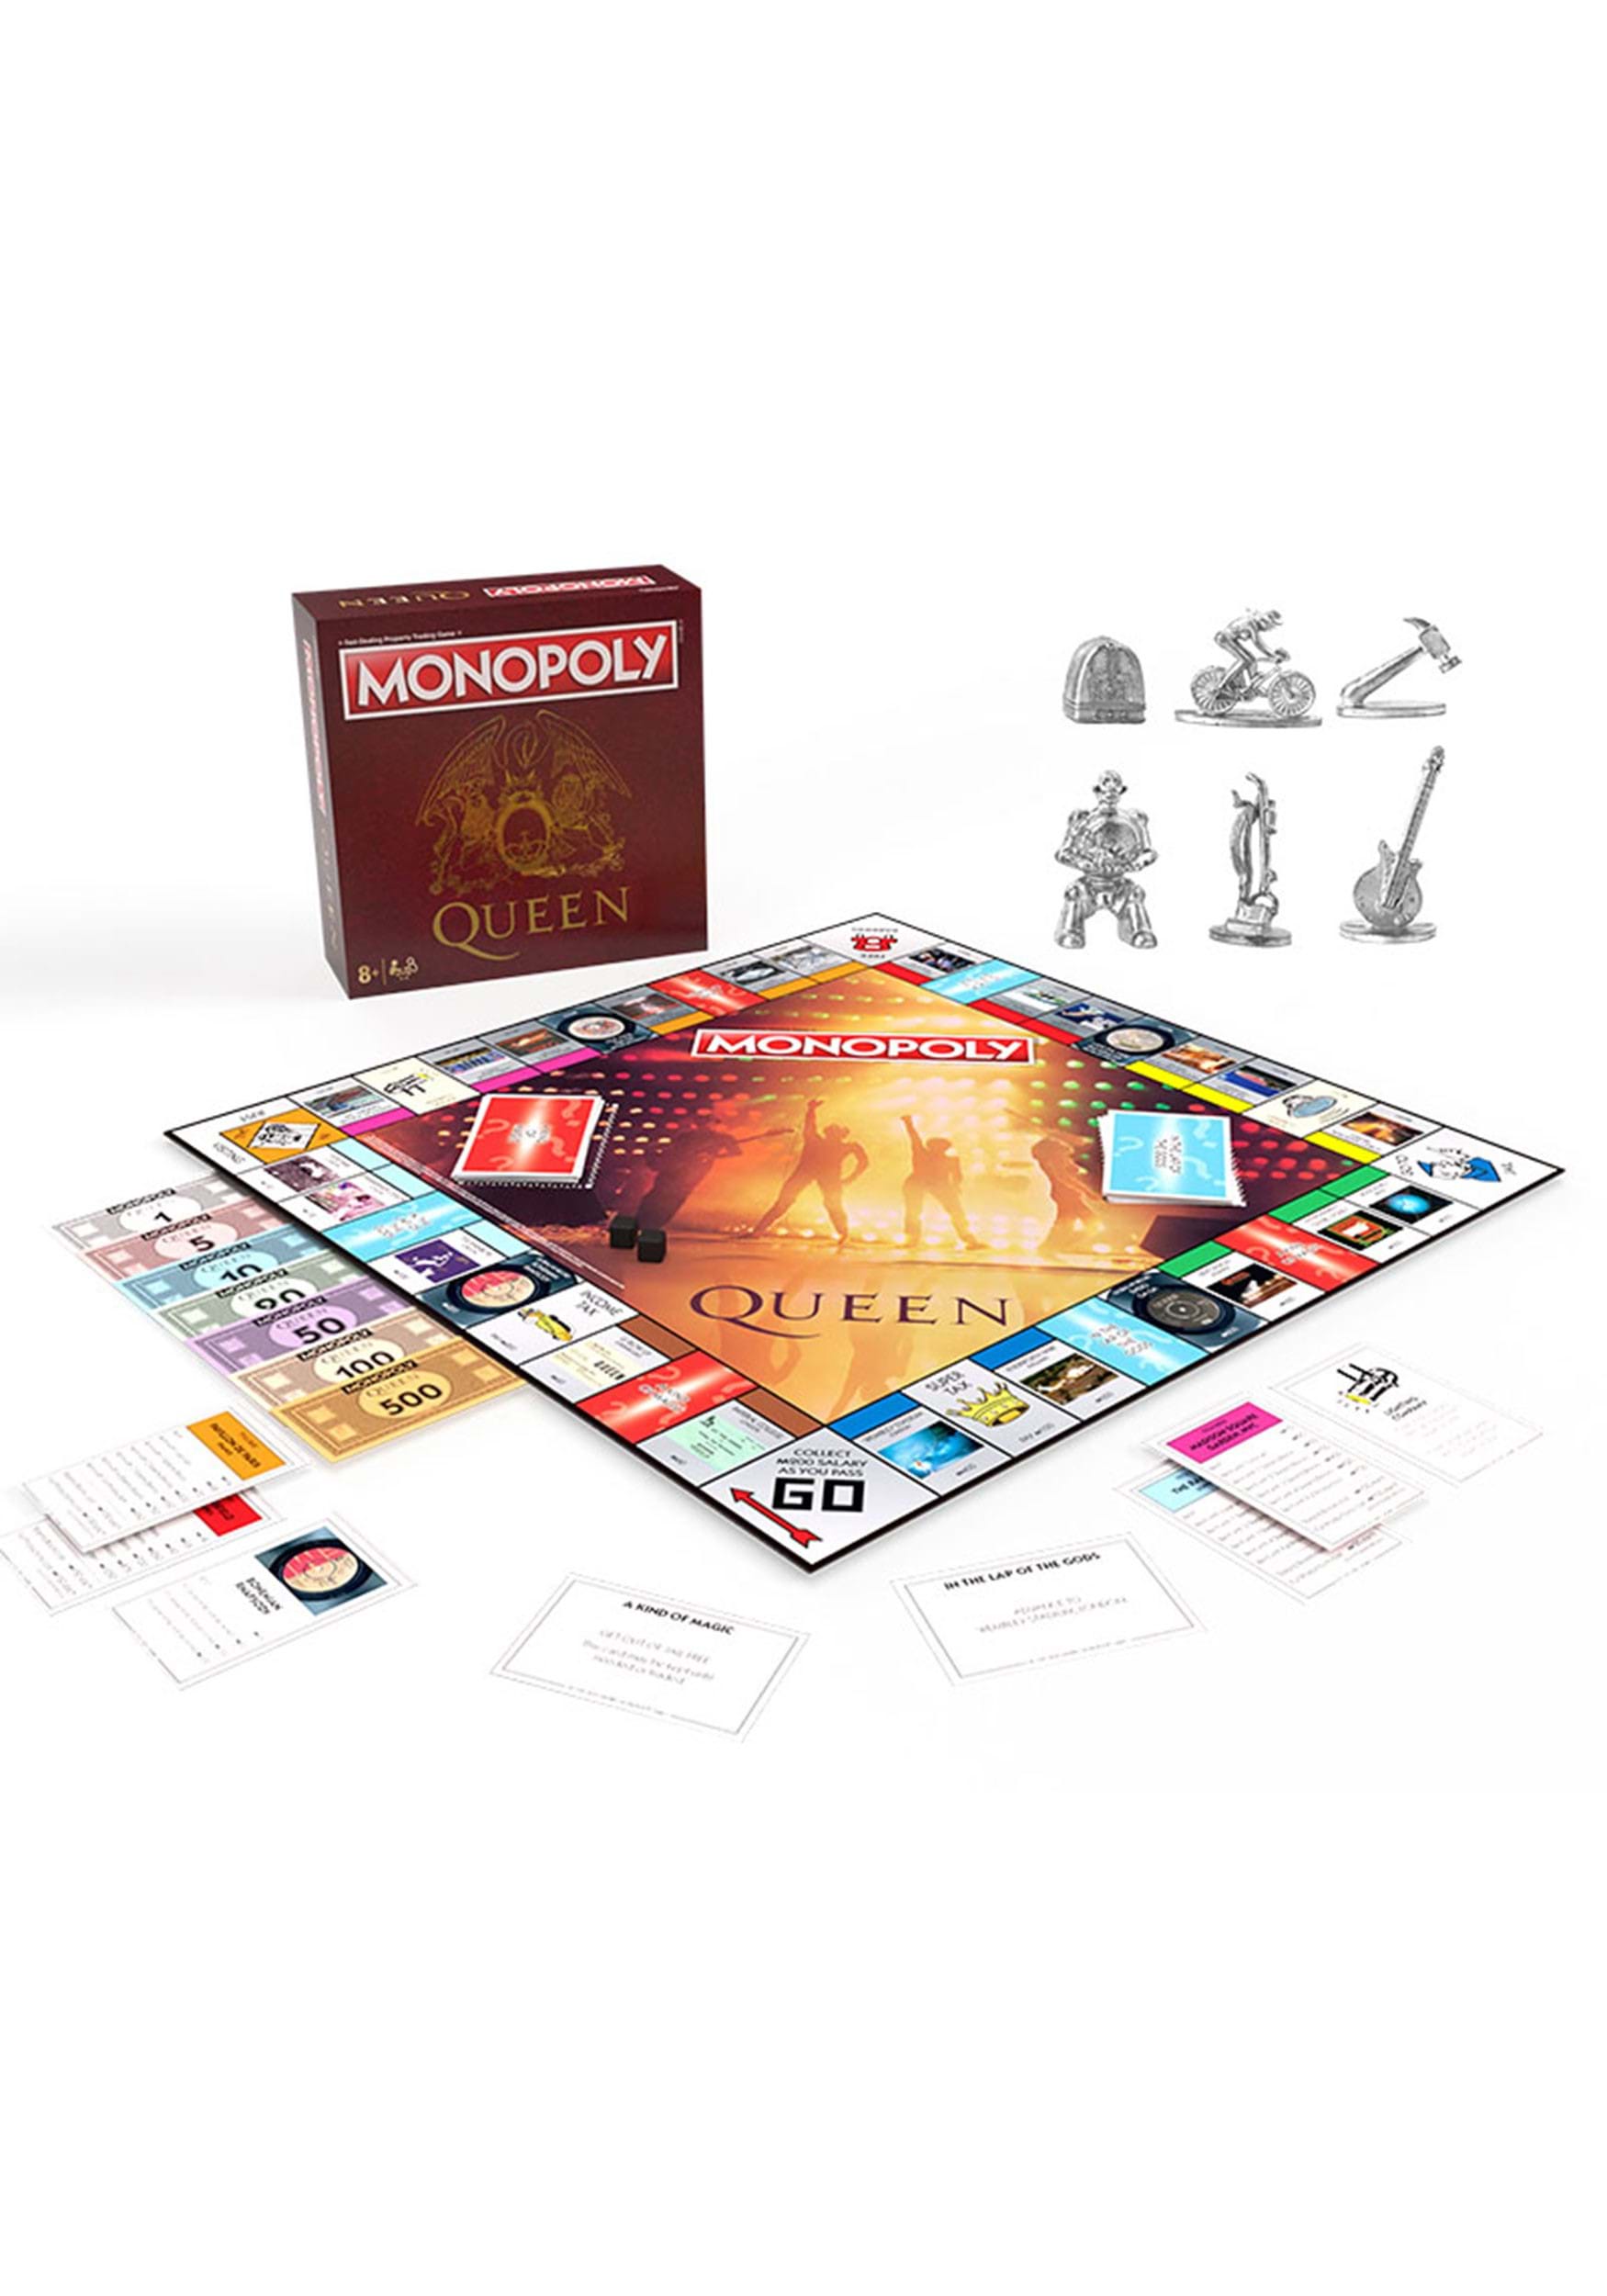 QUEEN EDITION MONOPOLY BOARD GAME BRAND NEW CHRISTMAS GIFT FREDDIE MERCURY XMAS 